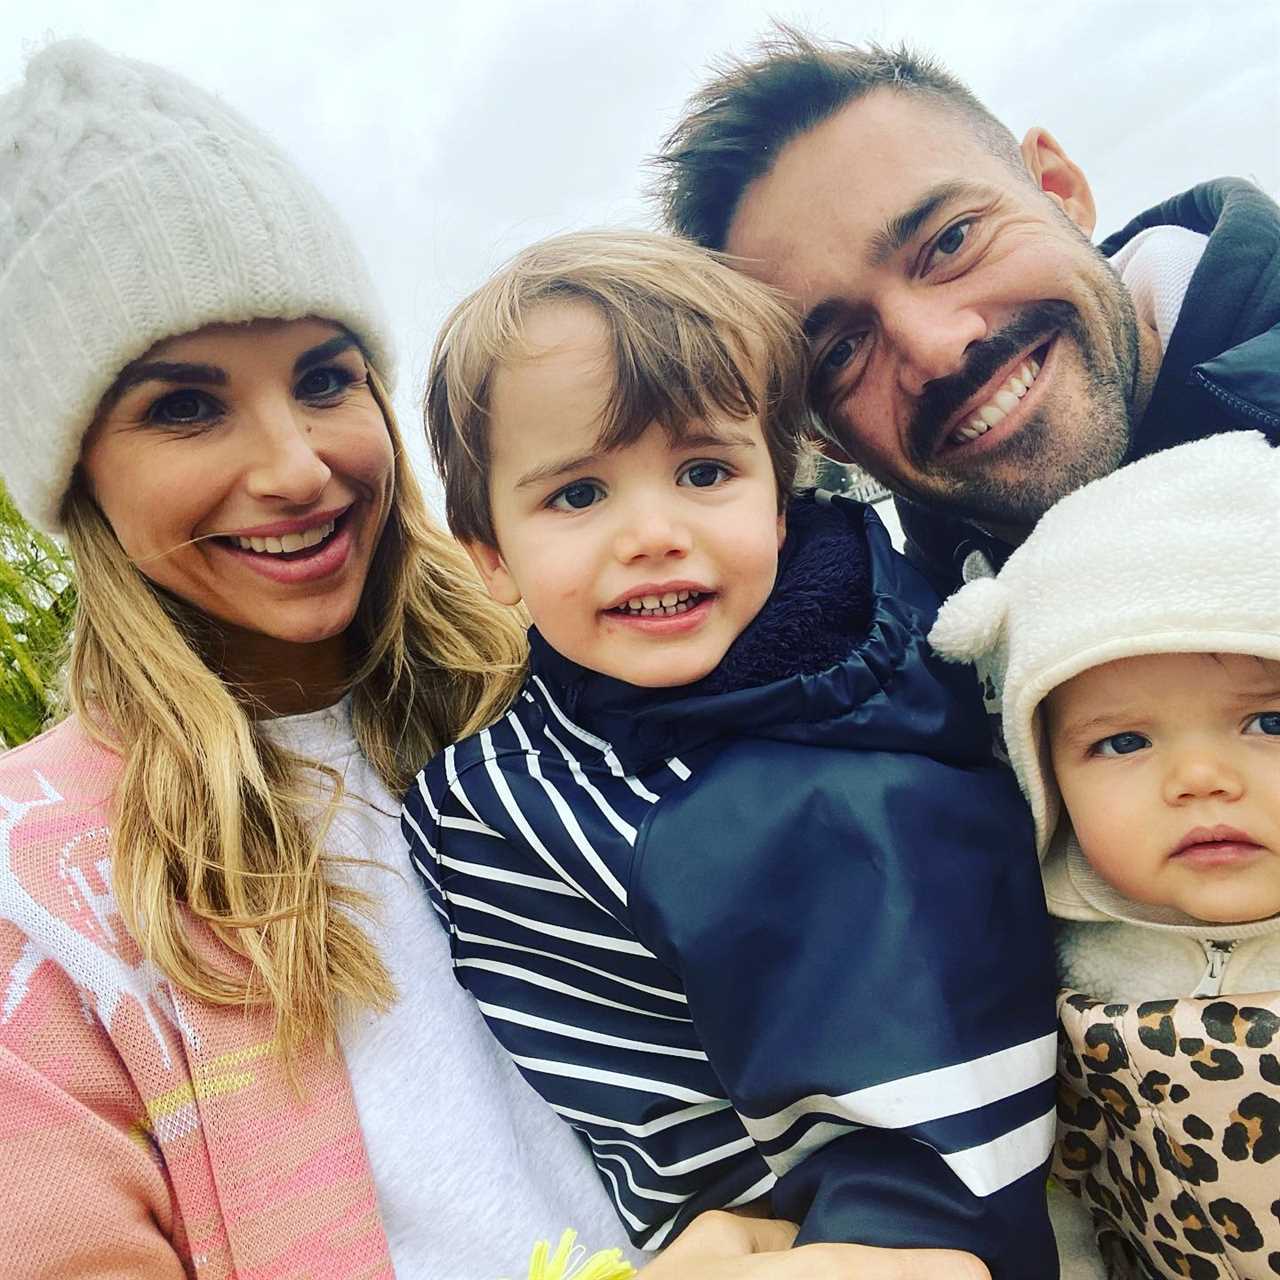 I was ready to come face-to-face with my dead brother on Everest, says Spencer Matthews